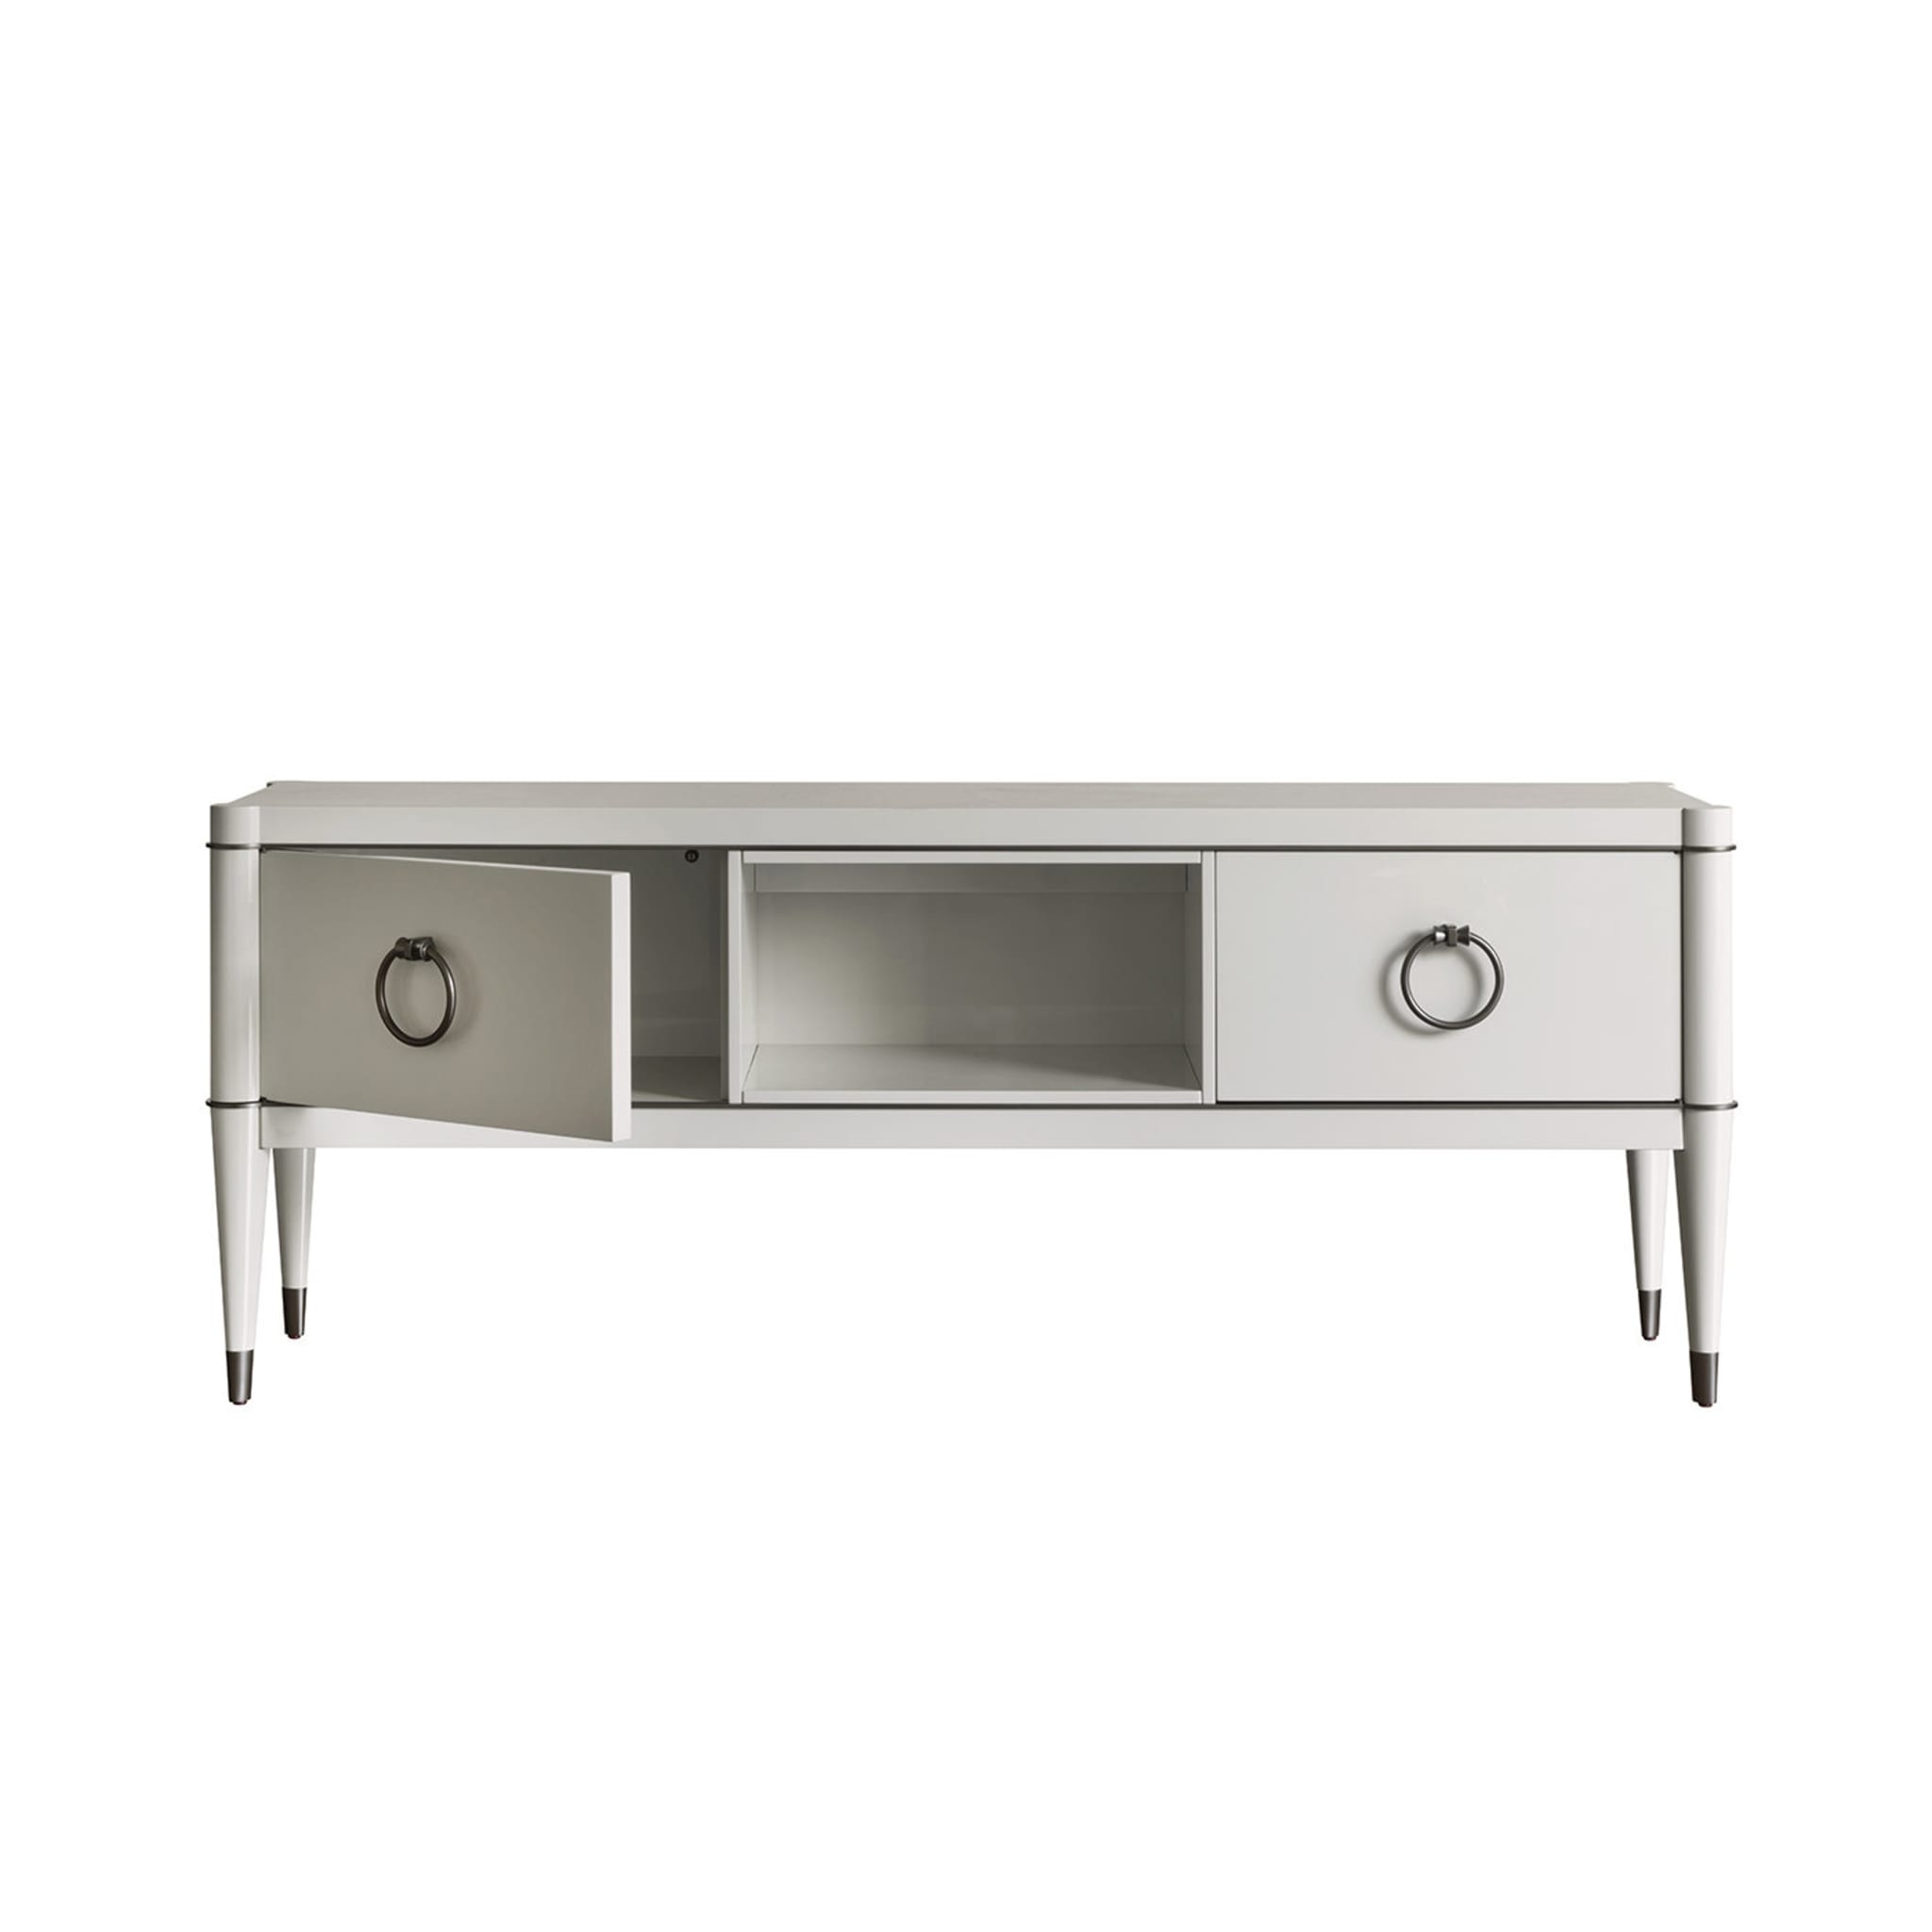 Ambra sideboard tv stand - Alternative view 1